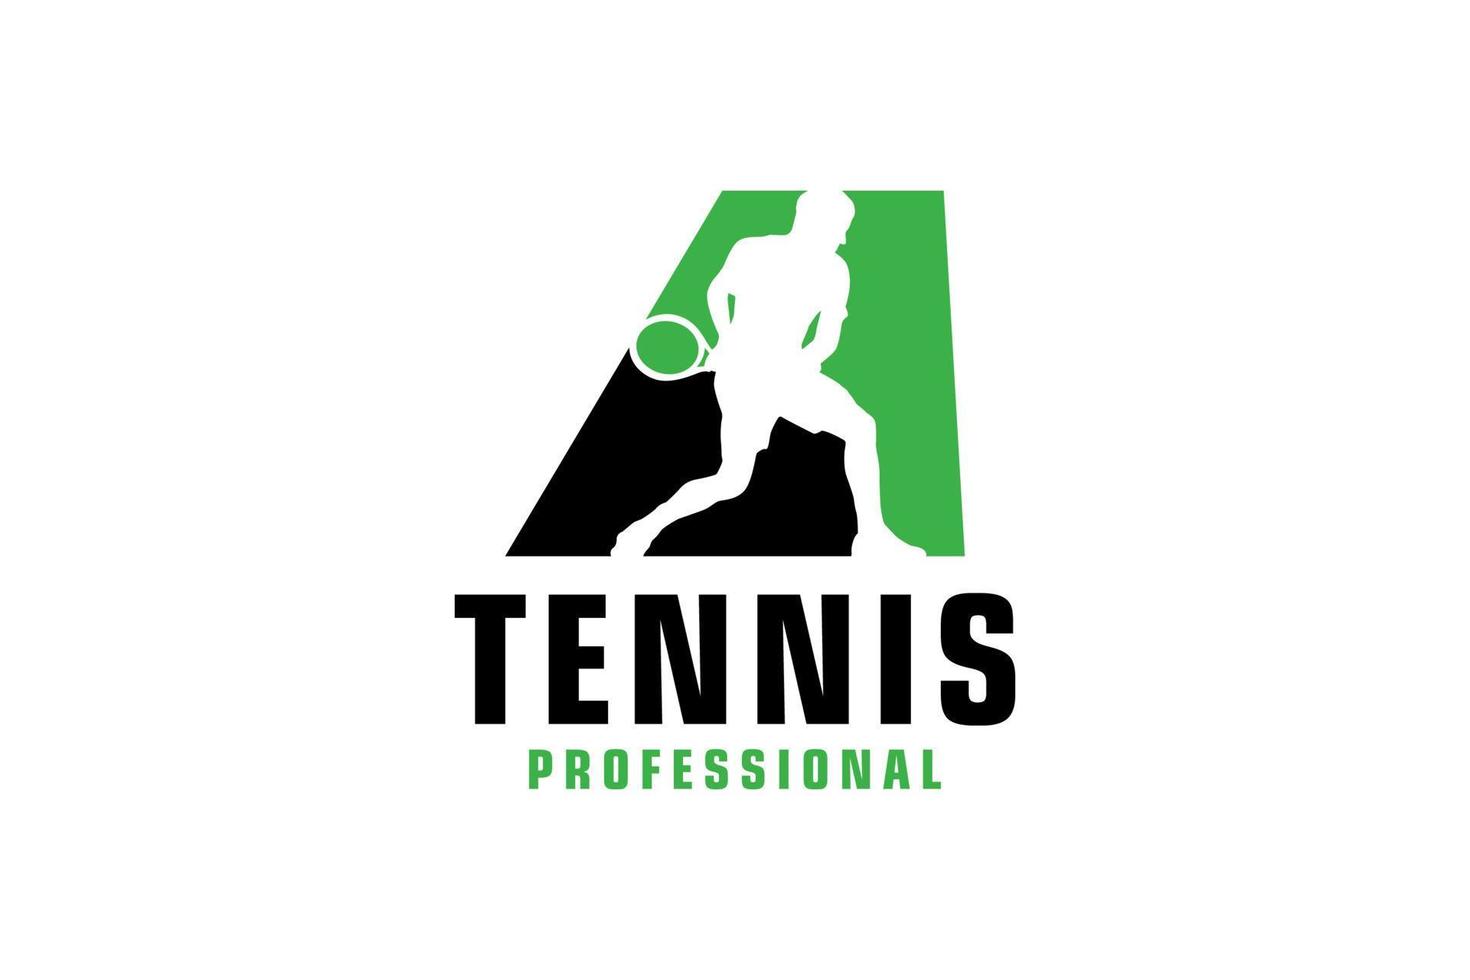 Letter A with Tennis player silhouette Logo Design. Vector Design Template Elements for Sport Team or Corporate Identity.